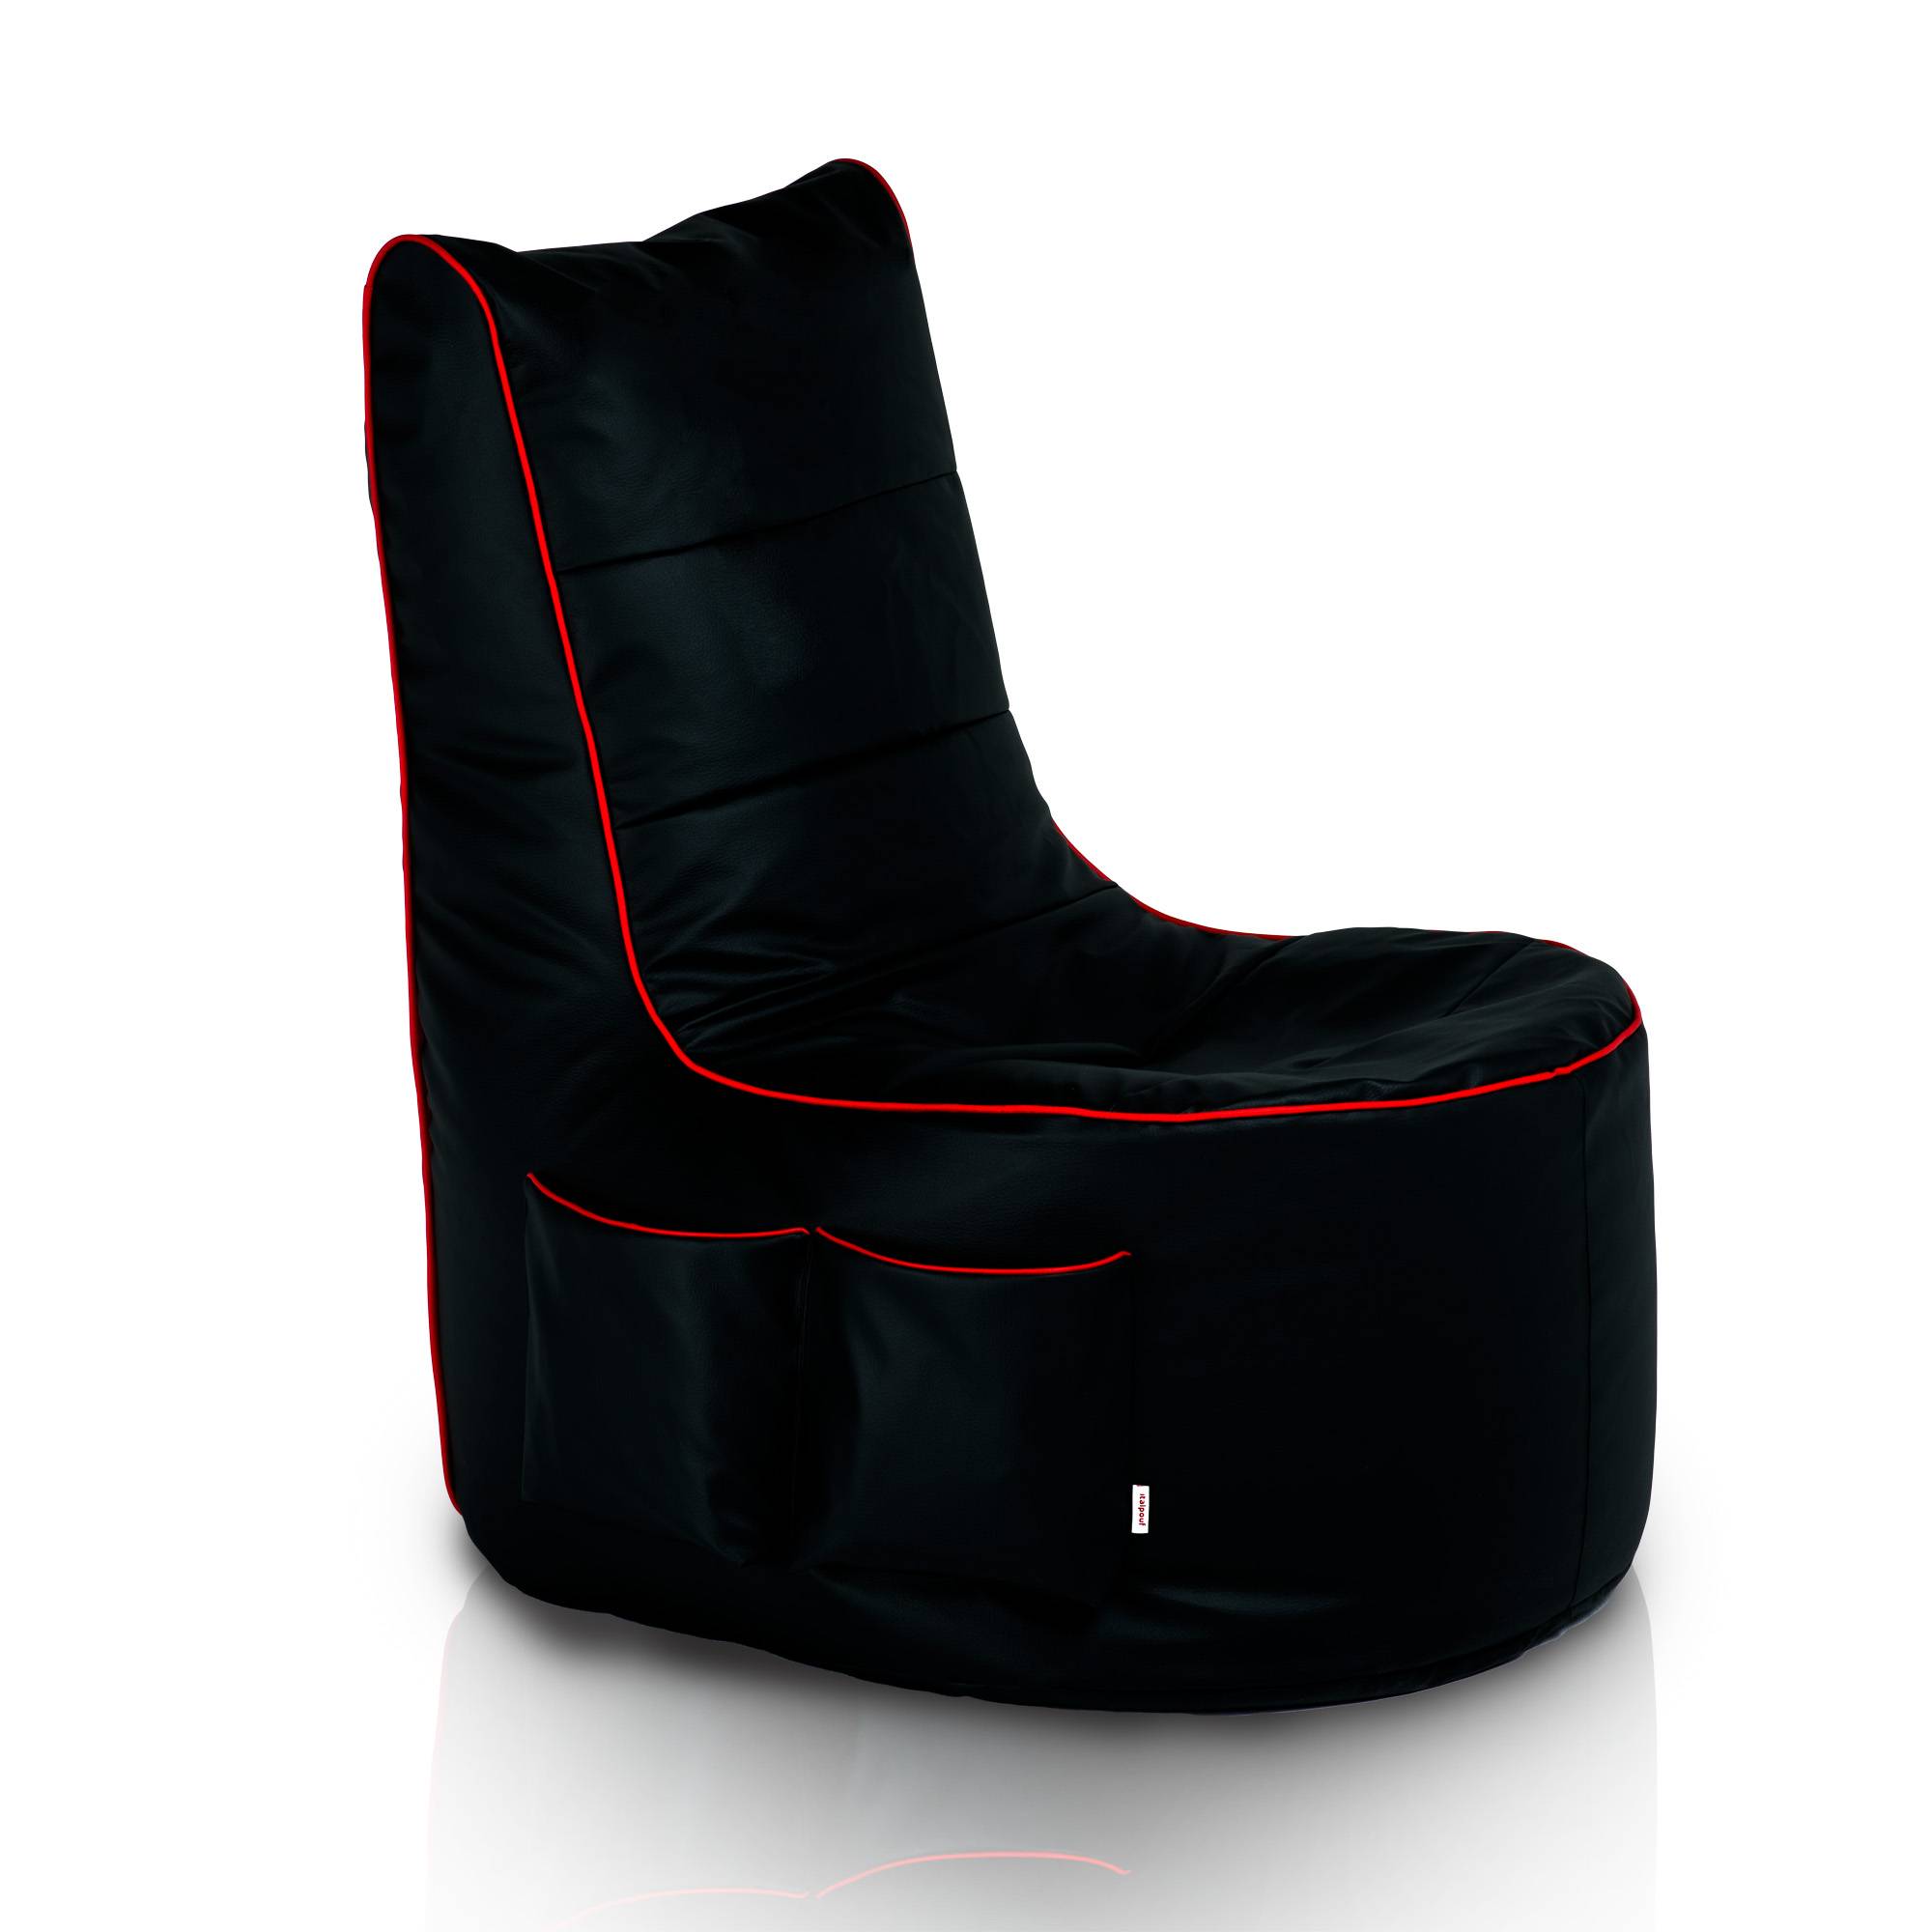 Pouf Game OverPouf fauteuil gamer + repose pieds - Pouf Poire